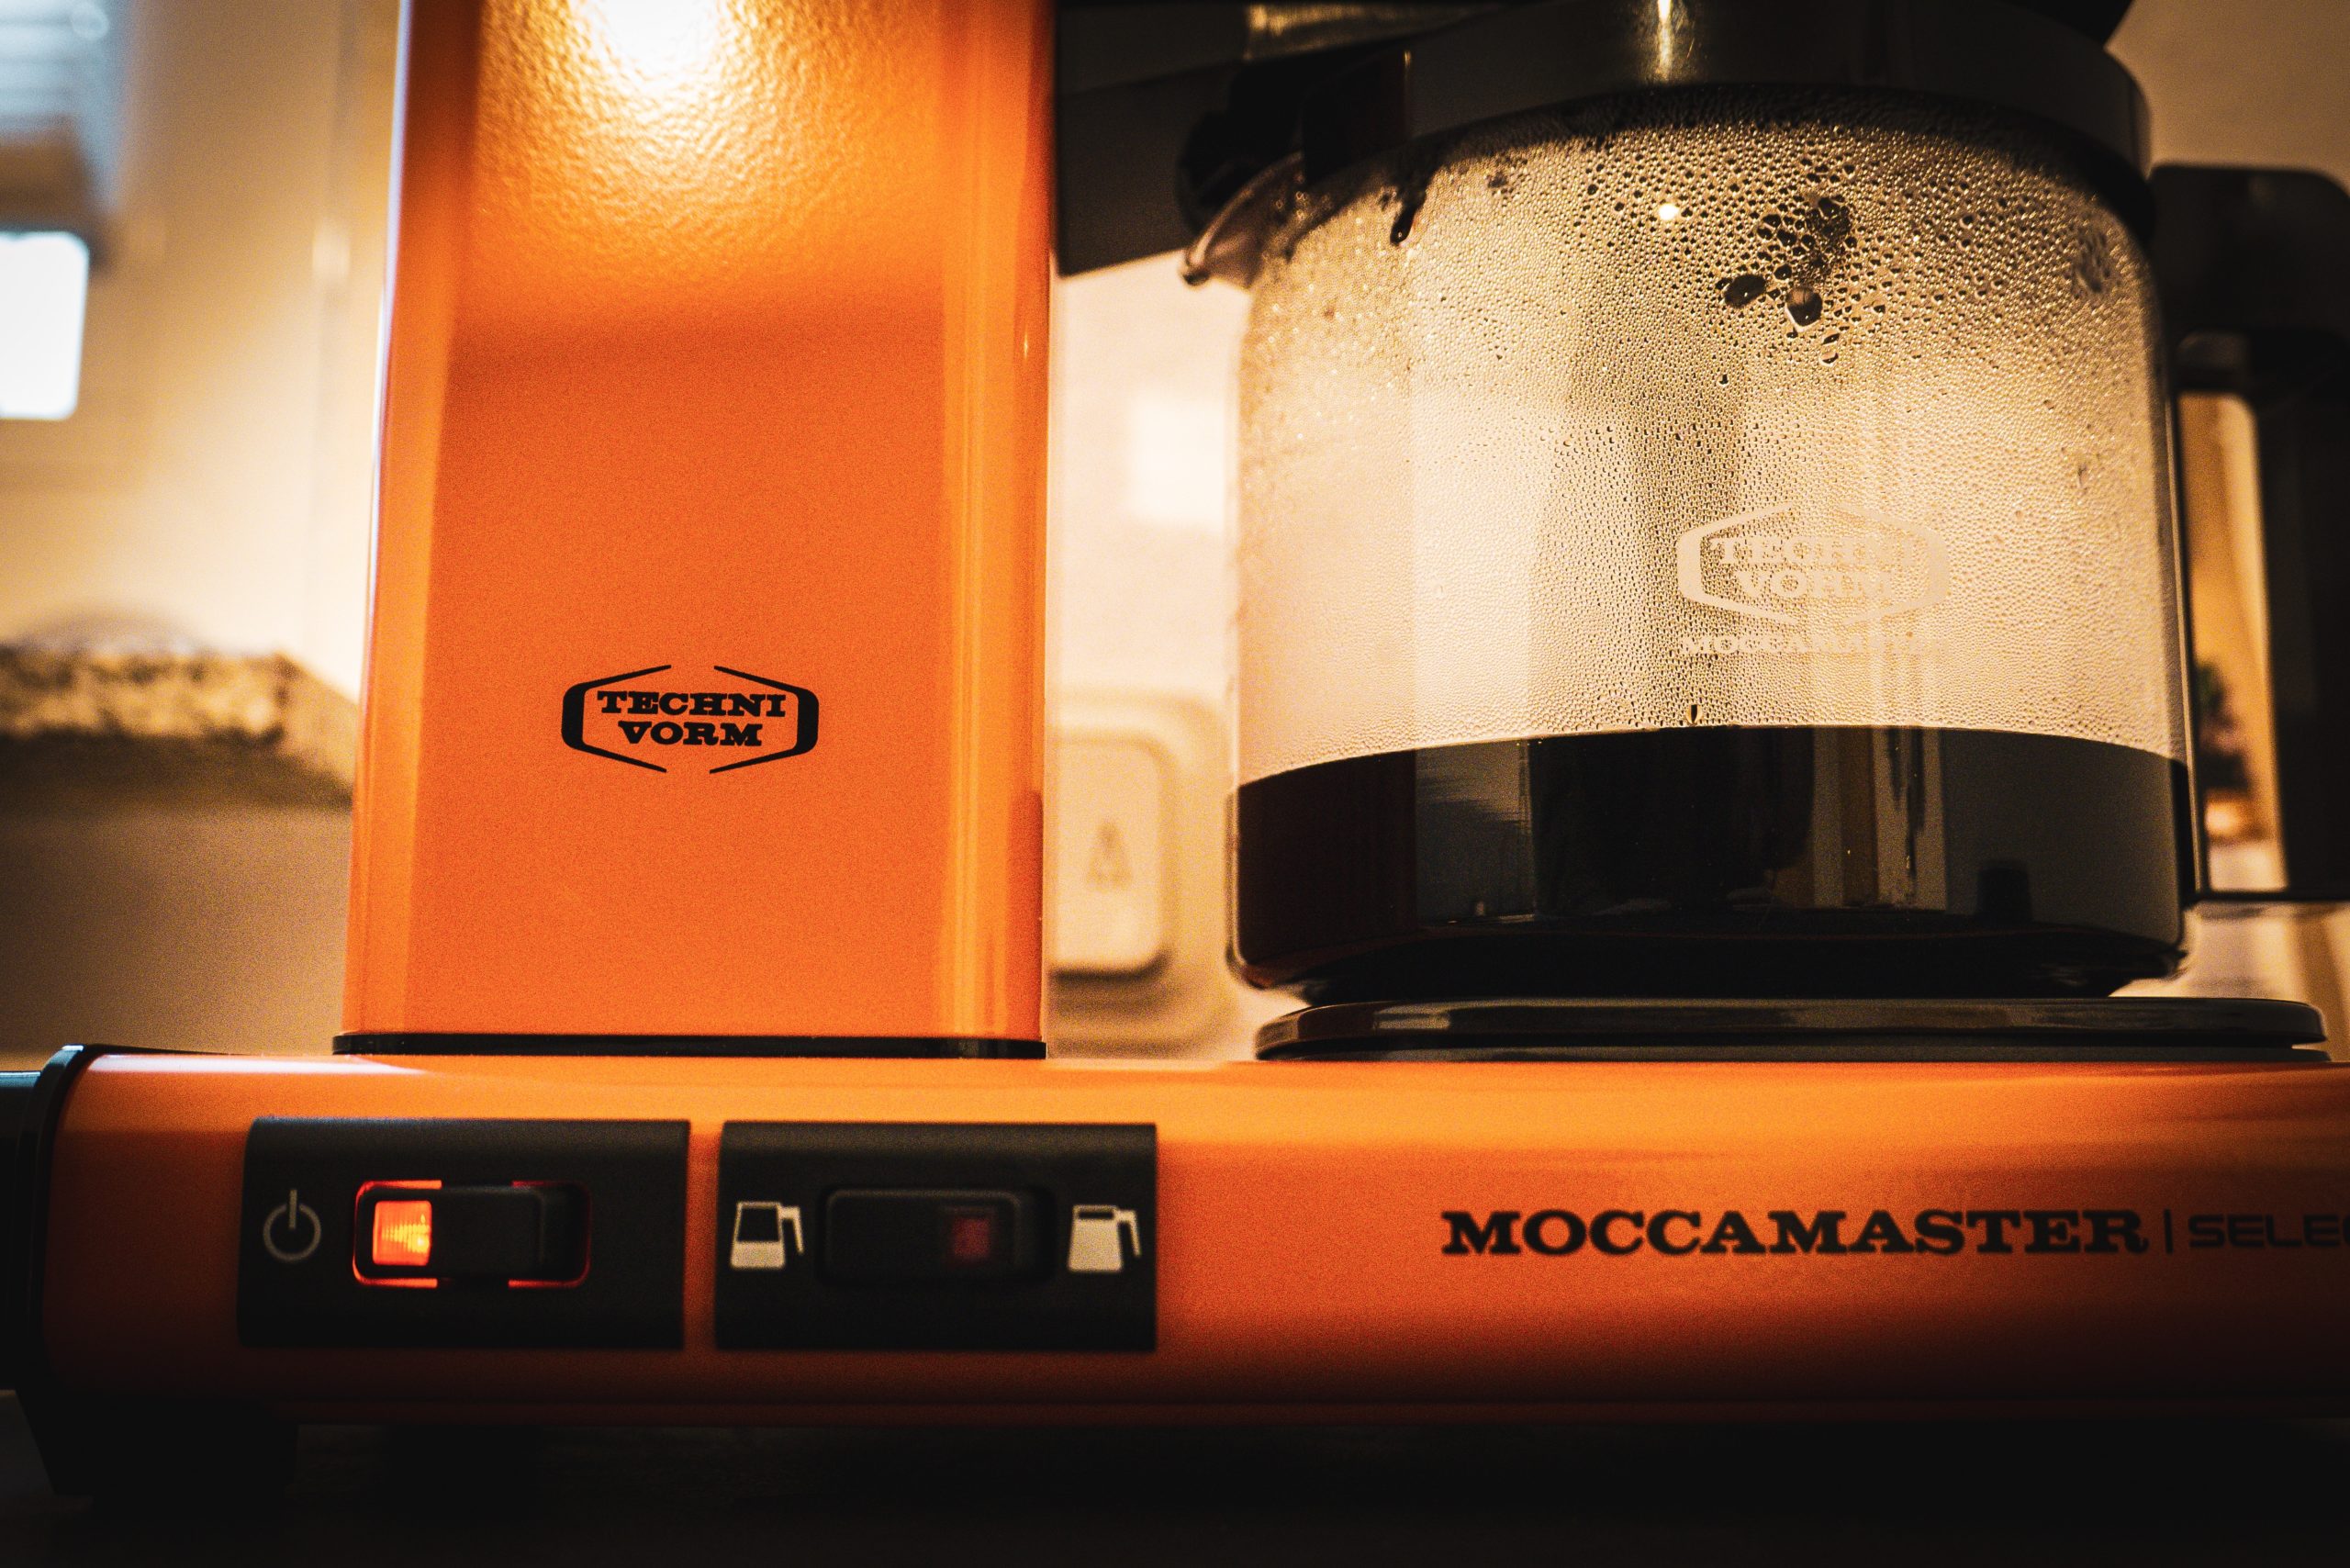 Moccamaster… Style over Substance?